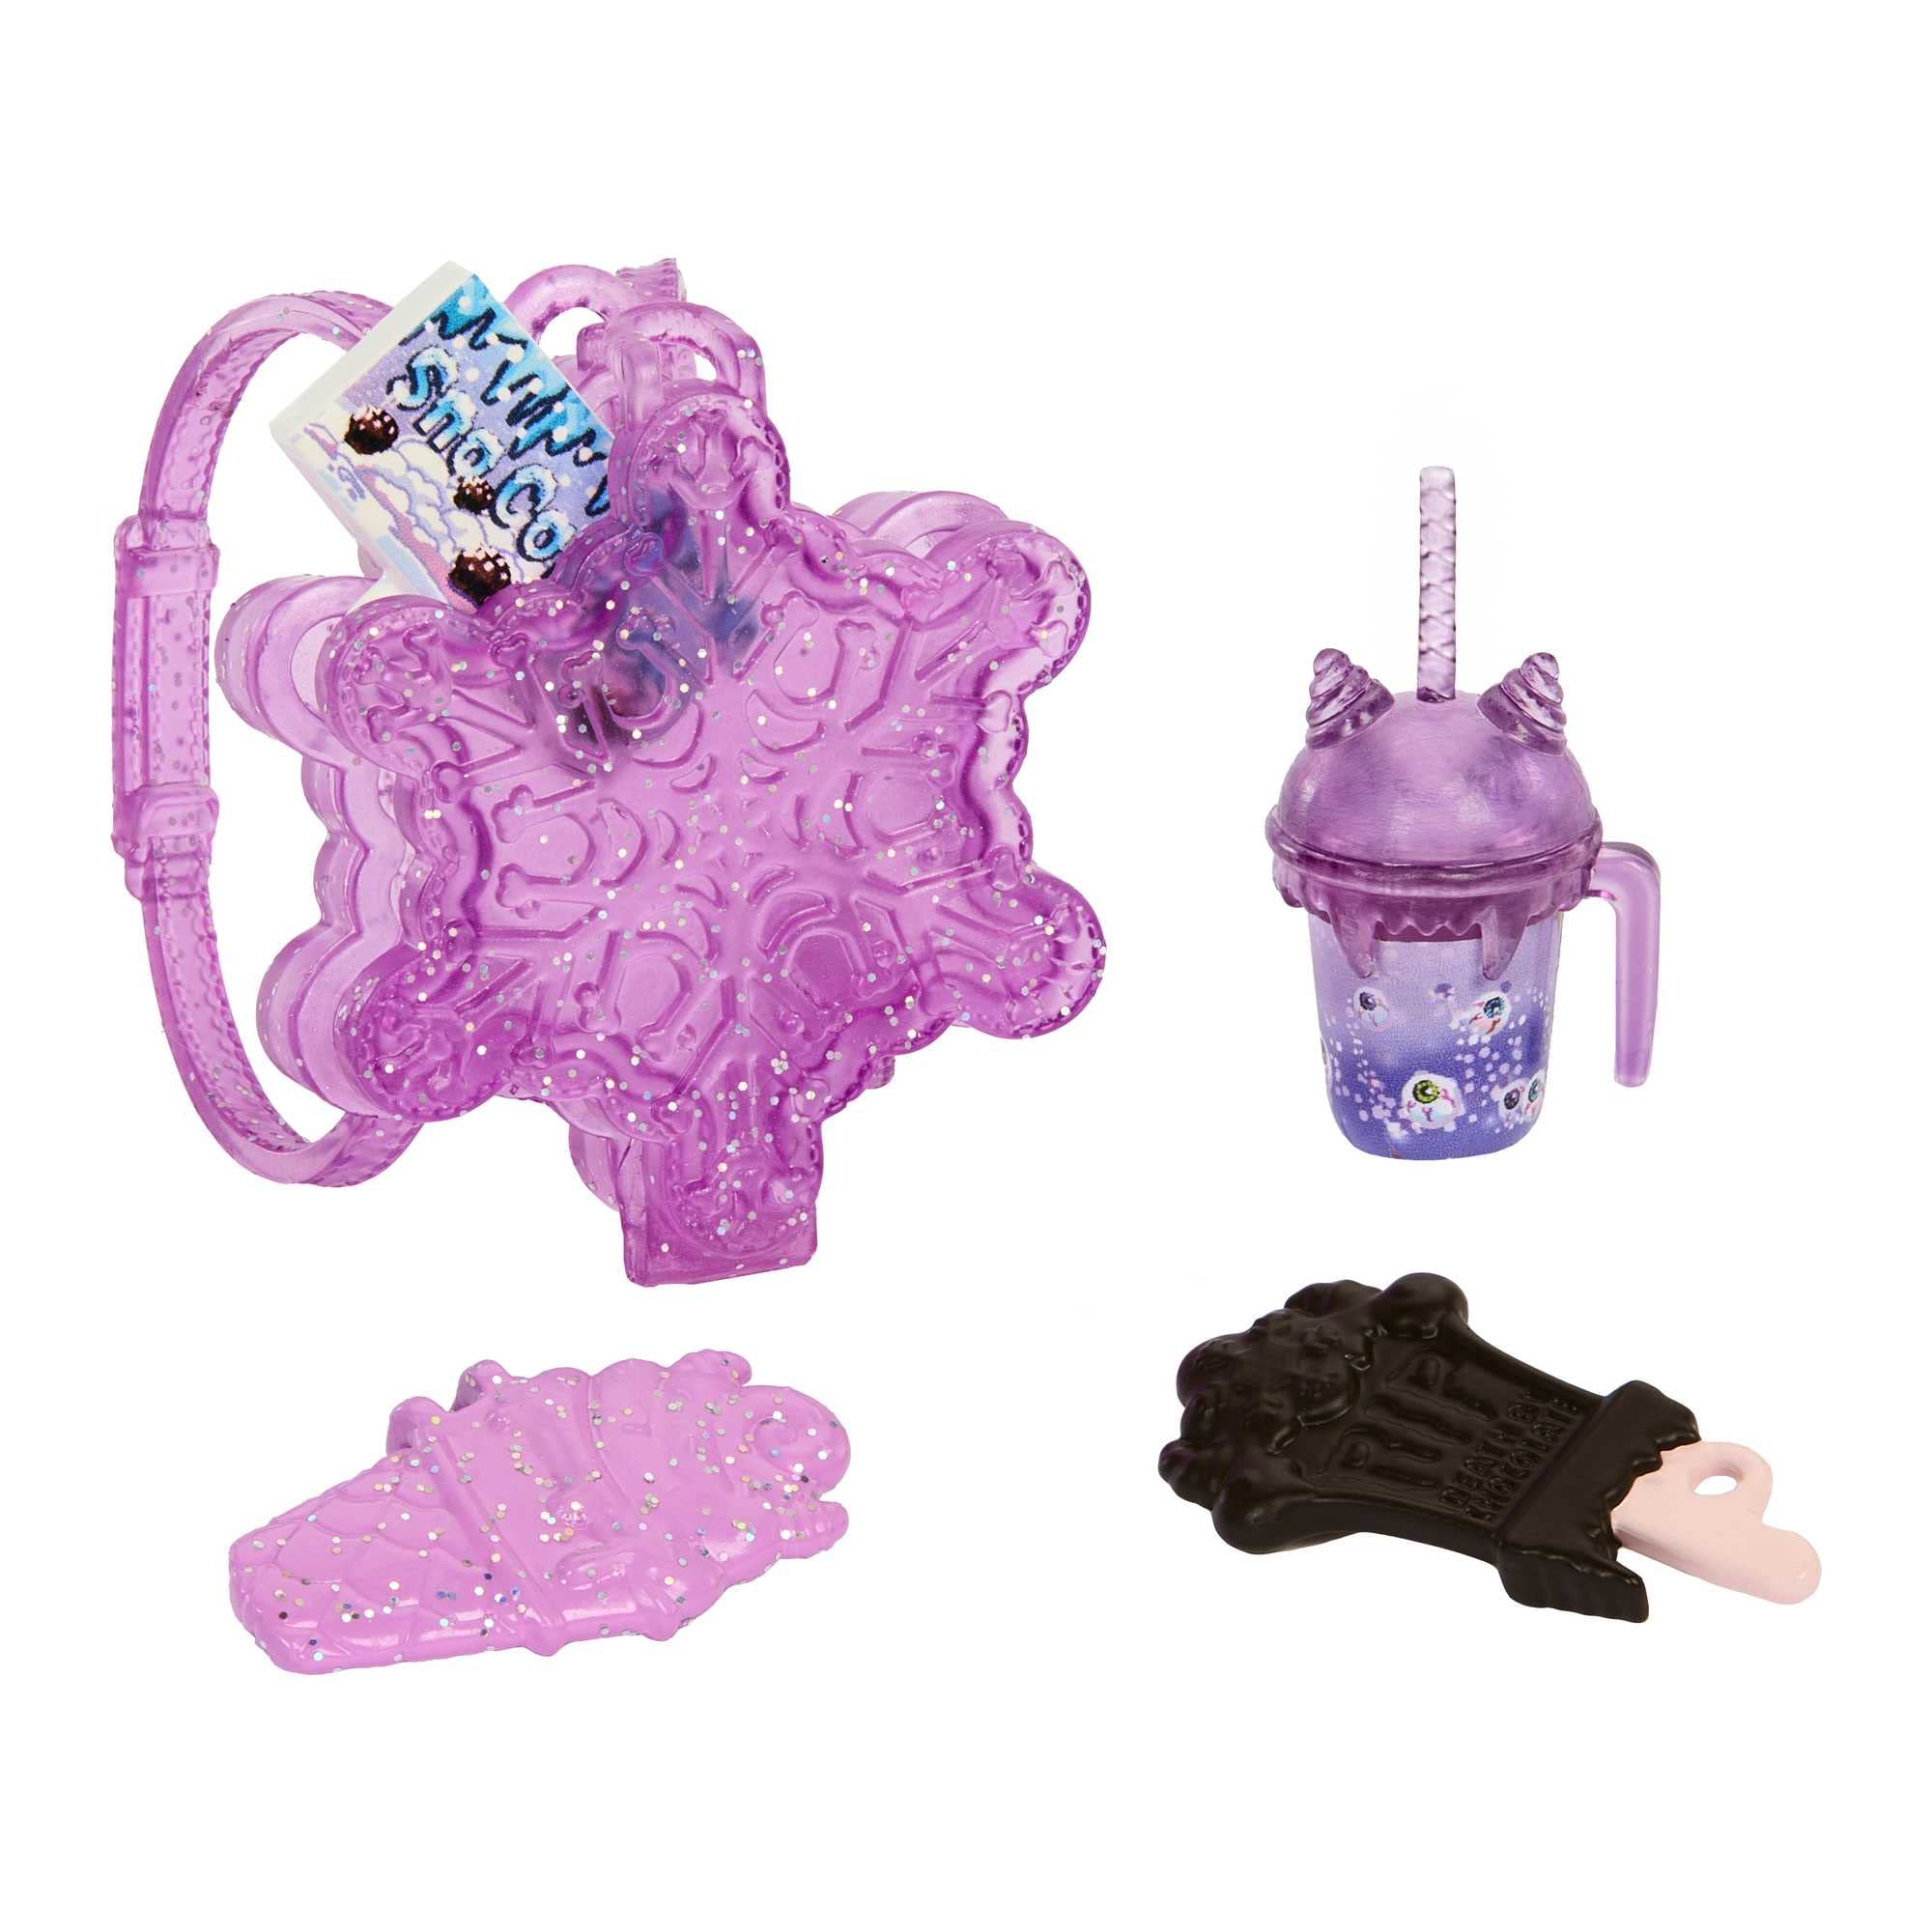 Monster High Doll, Abbey Bominable Yeti with Pet Mammoth Tundra & Accessories Including Furry Scarf & Snowflake Backpack